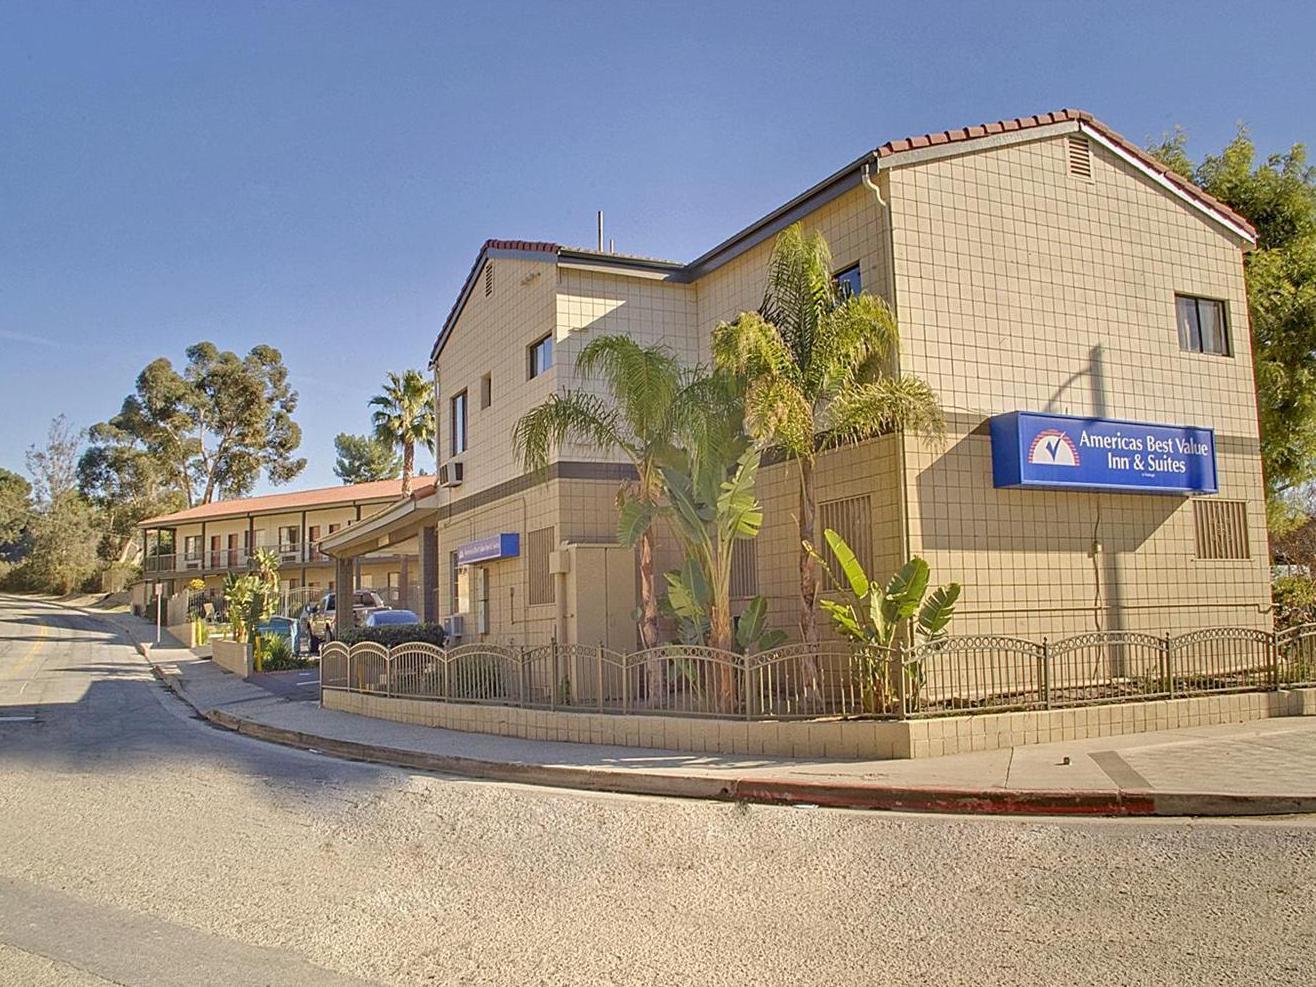 Americas Best Value Inn And Suites Los Angeles Booking,Americas Best Value Inn And Suites Los Angeles Resort,Americas Best Value Inn And Suites Los Angeles reservation,Americas Best Value Inn And Suites Los Angeles deals,Americas Best Value Inn And Suites Los Angeles Phone Number,Americas Best Value Inn And Suites Los Angeles website,Americas Best Value Inn And Suites Los Angeles E-mail,Americas Best Value Inn And Suites Los Angeles address,Americas Best Value Inn And Suites Los Angeles Overview,Rooms & Rates,Americas Best Value Inn And Suites Los Angeles Photos,Americas Best Value Inn And Suites Los Angeles Location Amenities,Americas Best Value Inn And Suites Los Angeles Q&A,Americas Best Value Inn And Suites Los Angeles Map,Americas Best Value Inn And Suites Los Angeles Gallery,Americas Best Value Inn And Suites Los Angeles City of Los Angeles 2016, City of Los Angeles Americas Best Value Inn And Suites Los Angeles room types 2016, City of Los Angeles Americas Best Value Inn And Suites Los Angeles price 2016, Americas Best Value Inn And Suites Los Angeles in City of Los Angeles 2016, City of Los Angeles Americas Best Value Inn And Suites Los Angeles address, Americas Best Value Inn And Suites Los Angeles City of Los Angeles booking online, City of Los Angeles Americas Best Value Inn And Suites Los Angeles travel services, City of Los Angeles Americas Best Value Inn And Suites Los Angeles pick up services.